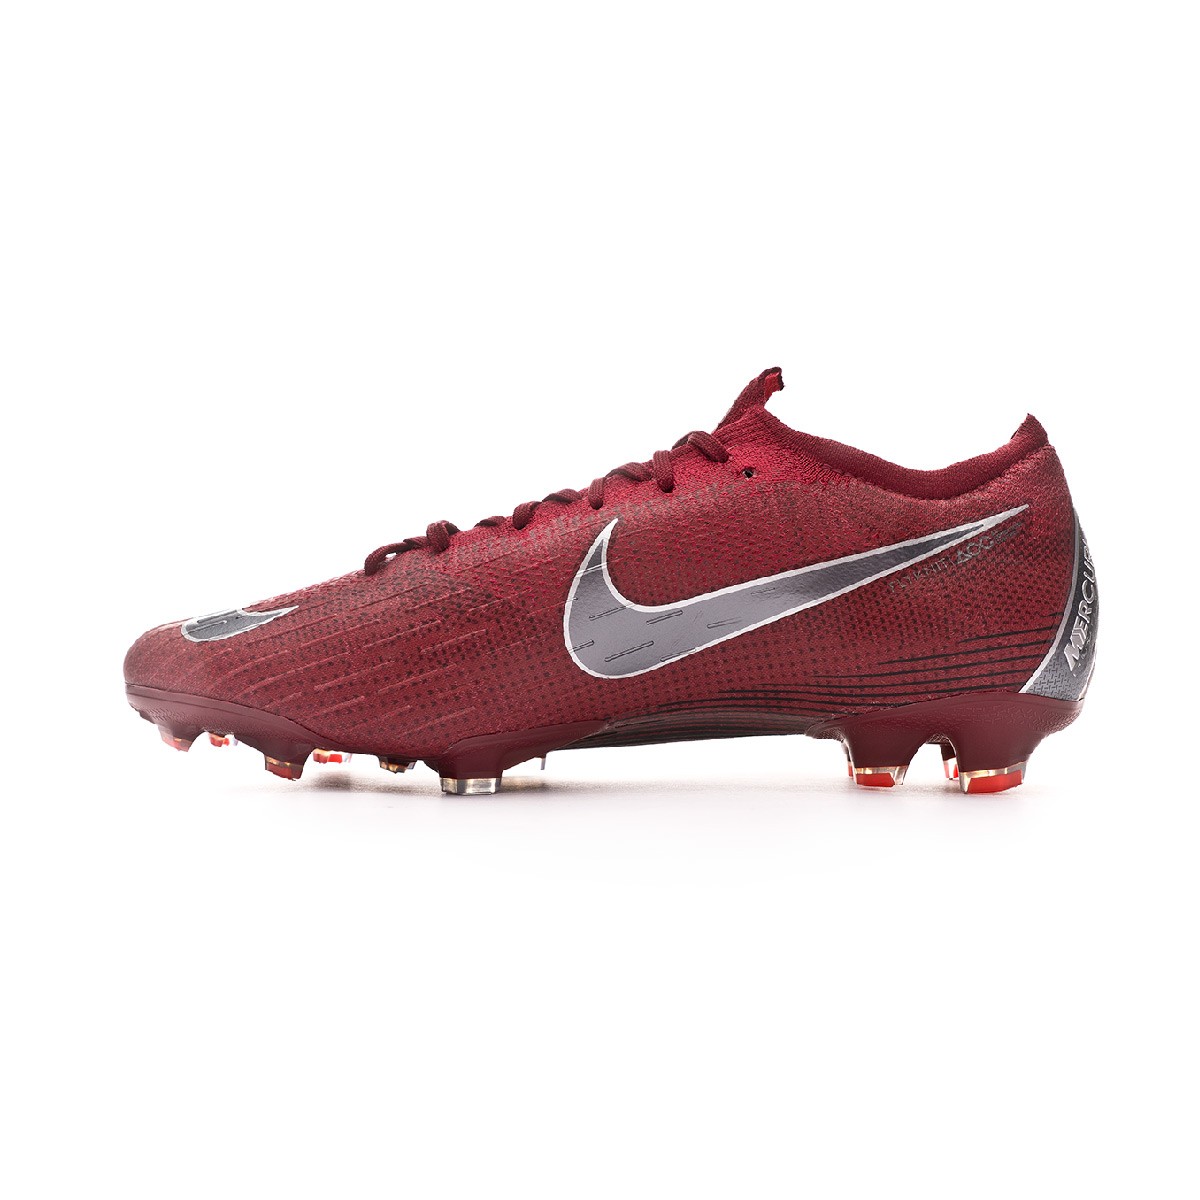 Nike ACC Mercurial Superfly 6 Elite FG Soccer Cleat Racer.